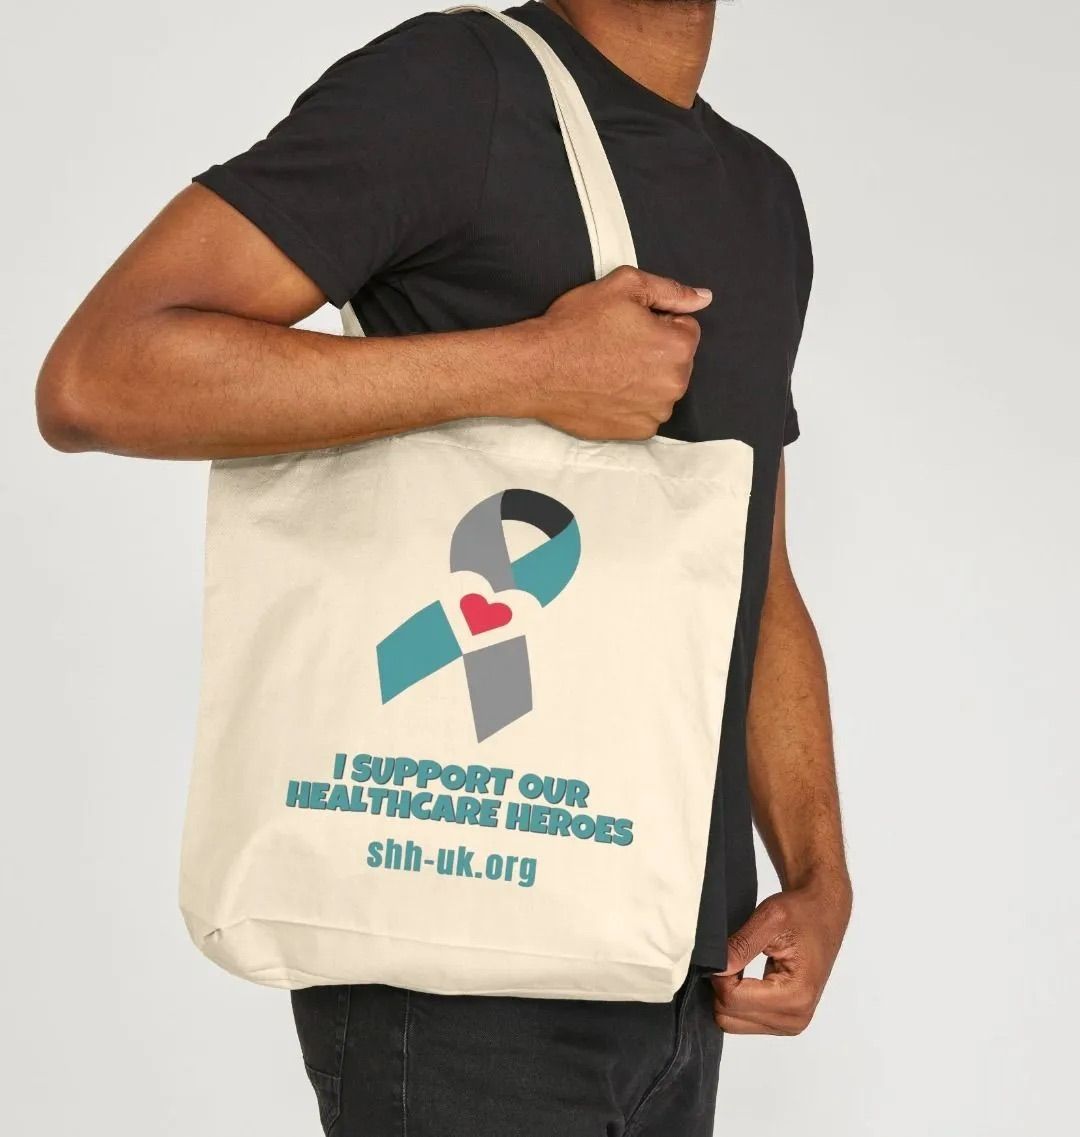 Looking for a meaningful way to support healthcare workers with Long Covid? Check out the Supporting Healthcare Heroes UKshop! Every purchase helps. Shop now: shh-uk.org/shop #CareForThoseWhoCared